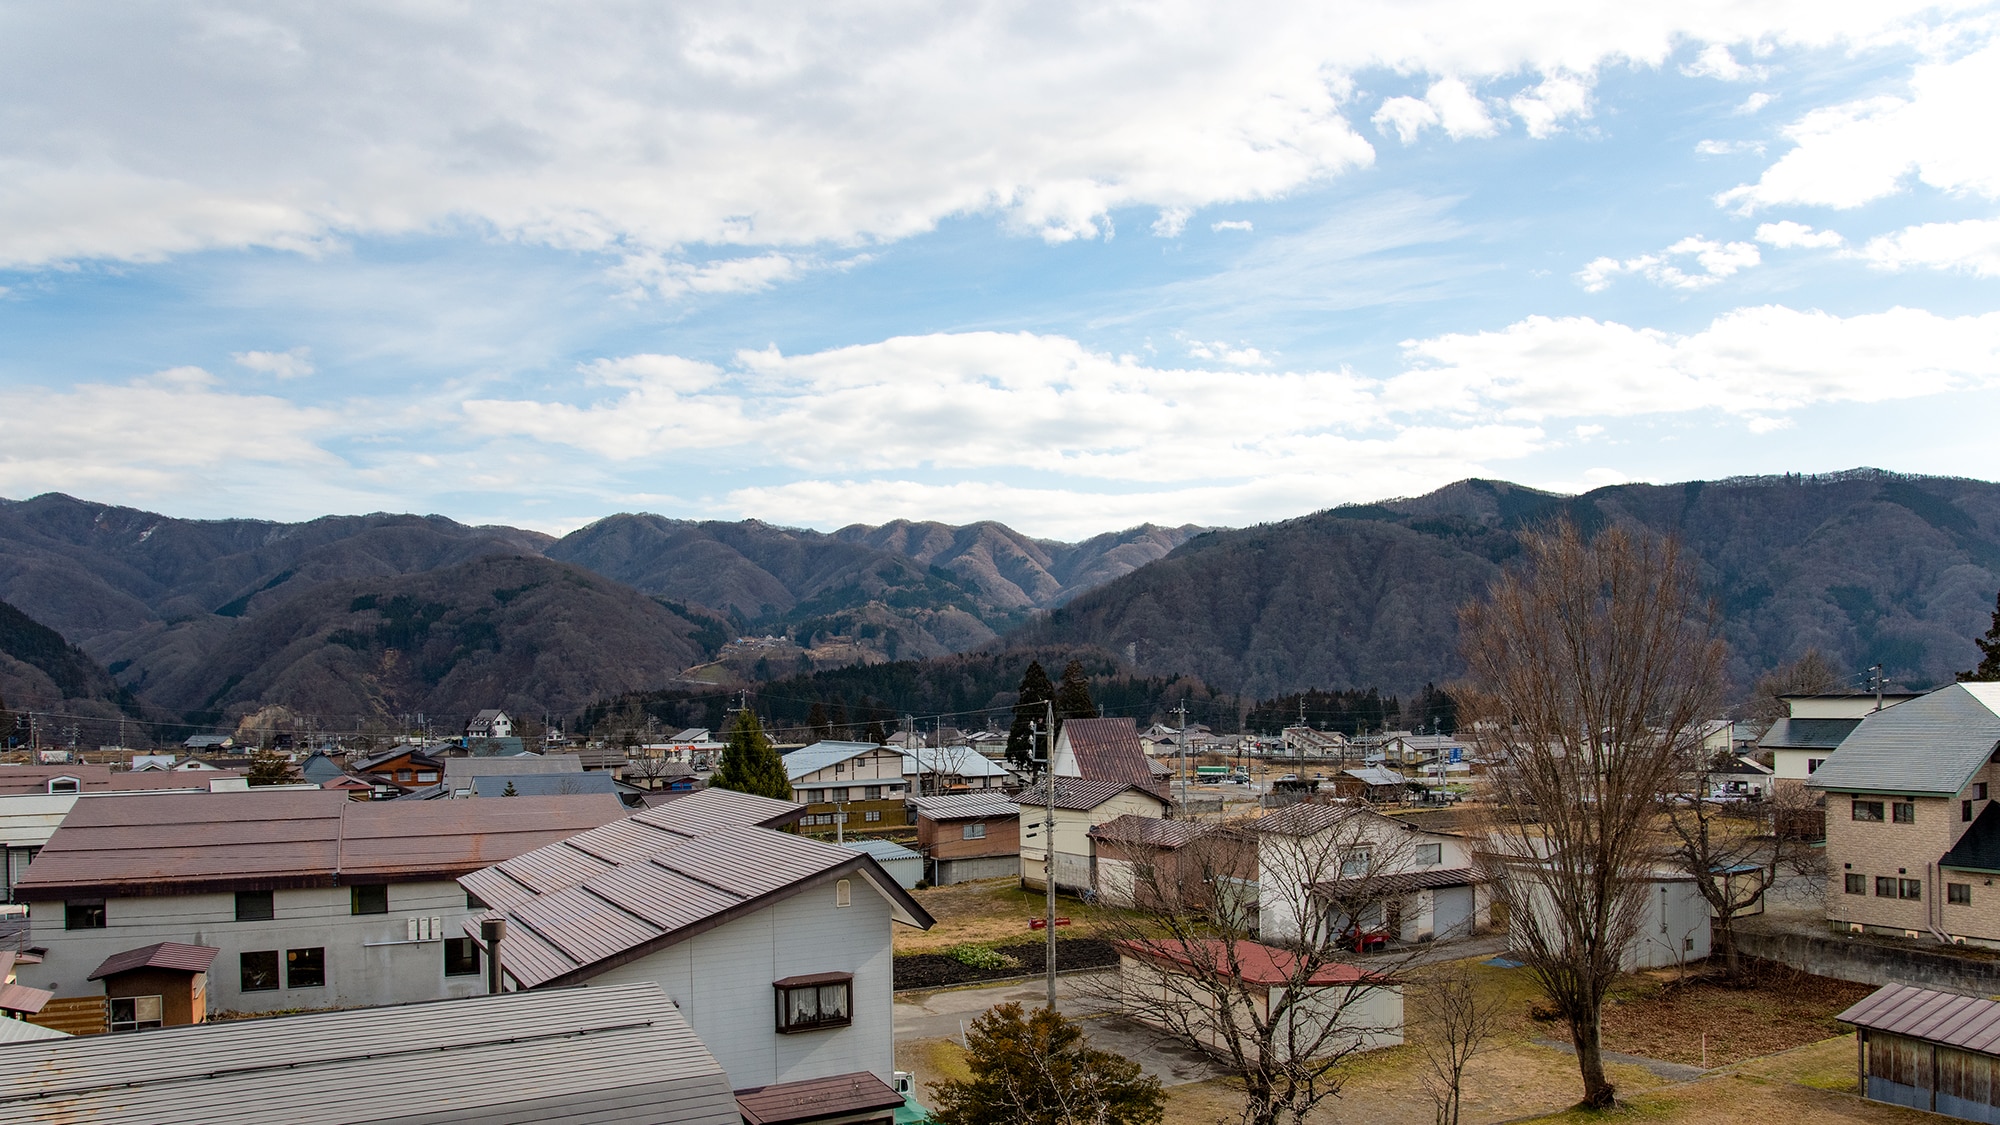 * View (Japanese-style room side of the main building): You can see the idyllic scenery and mountains from the window on the east side.